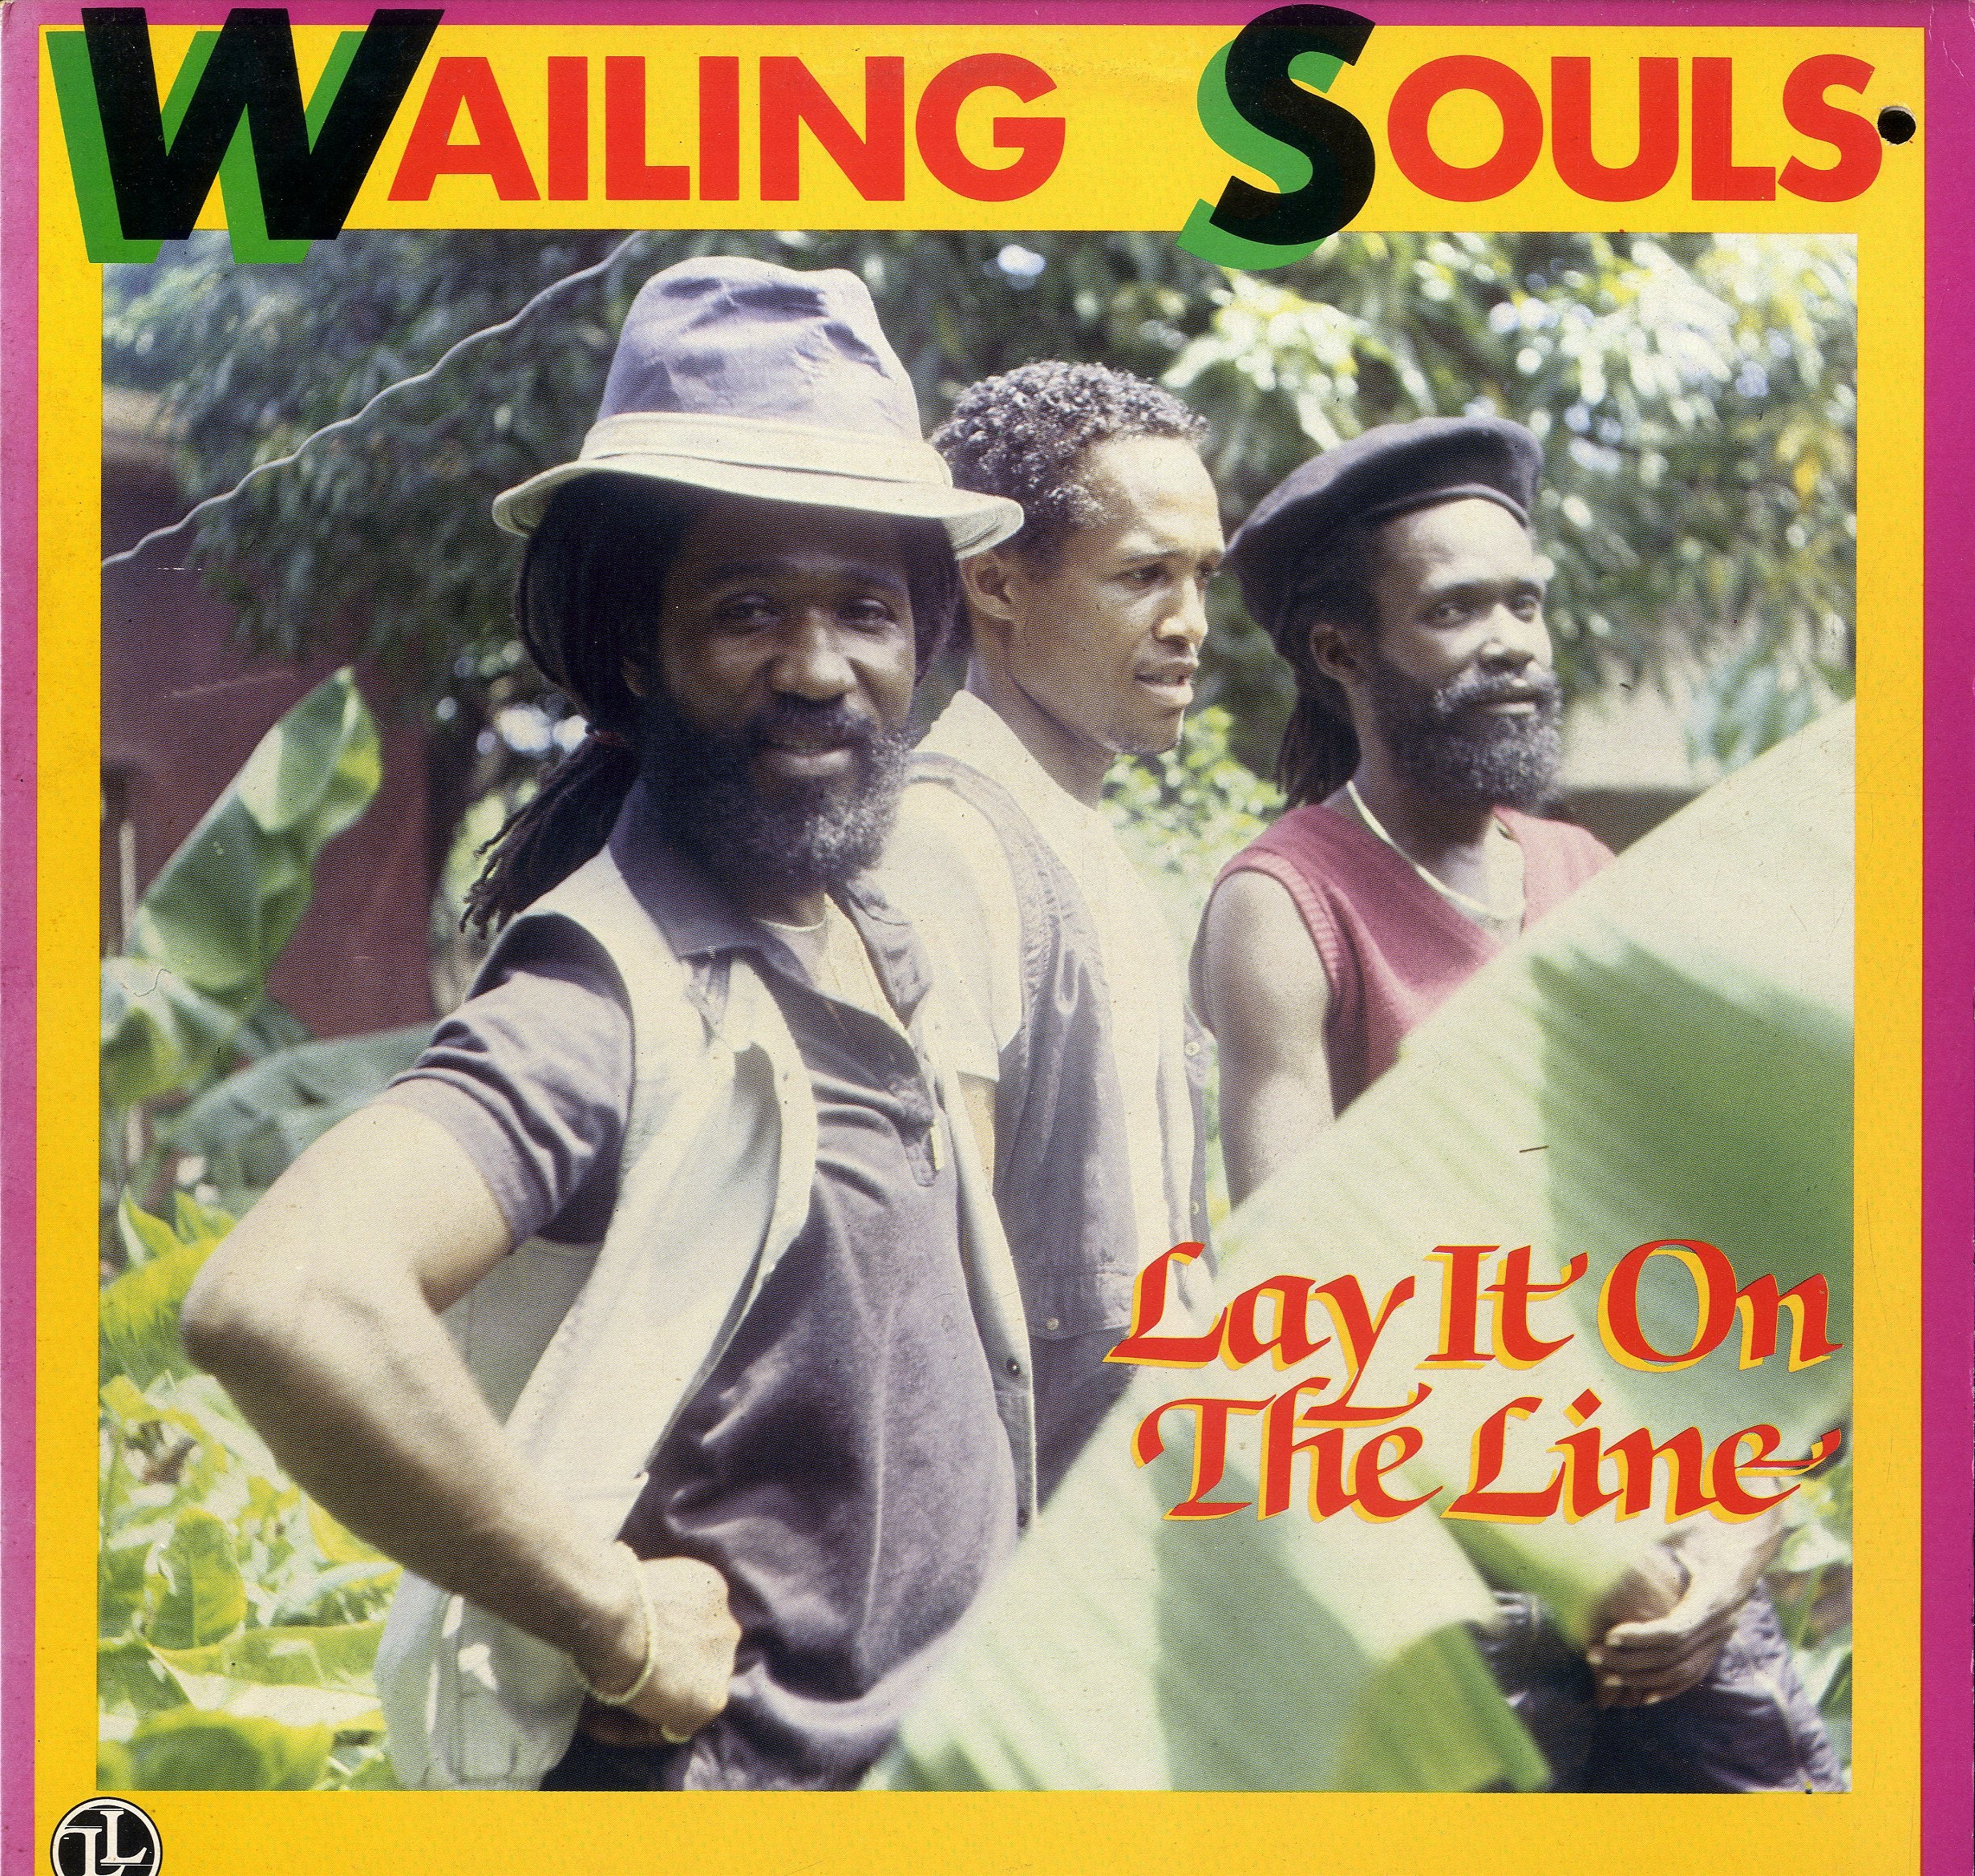 WAILING SOULS [Lay It On The Line]